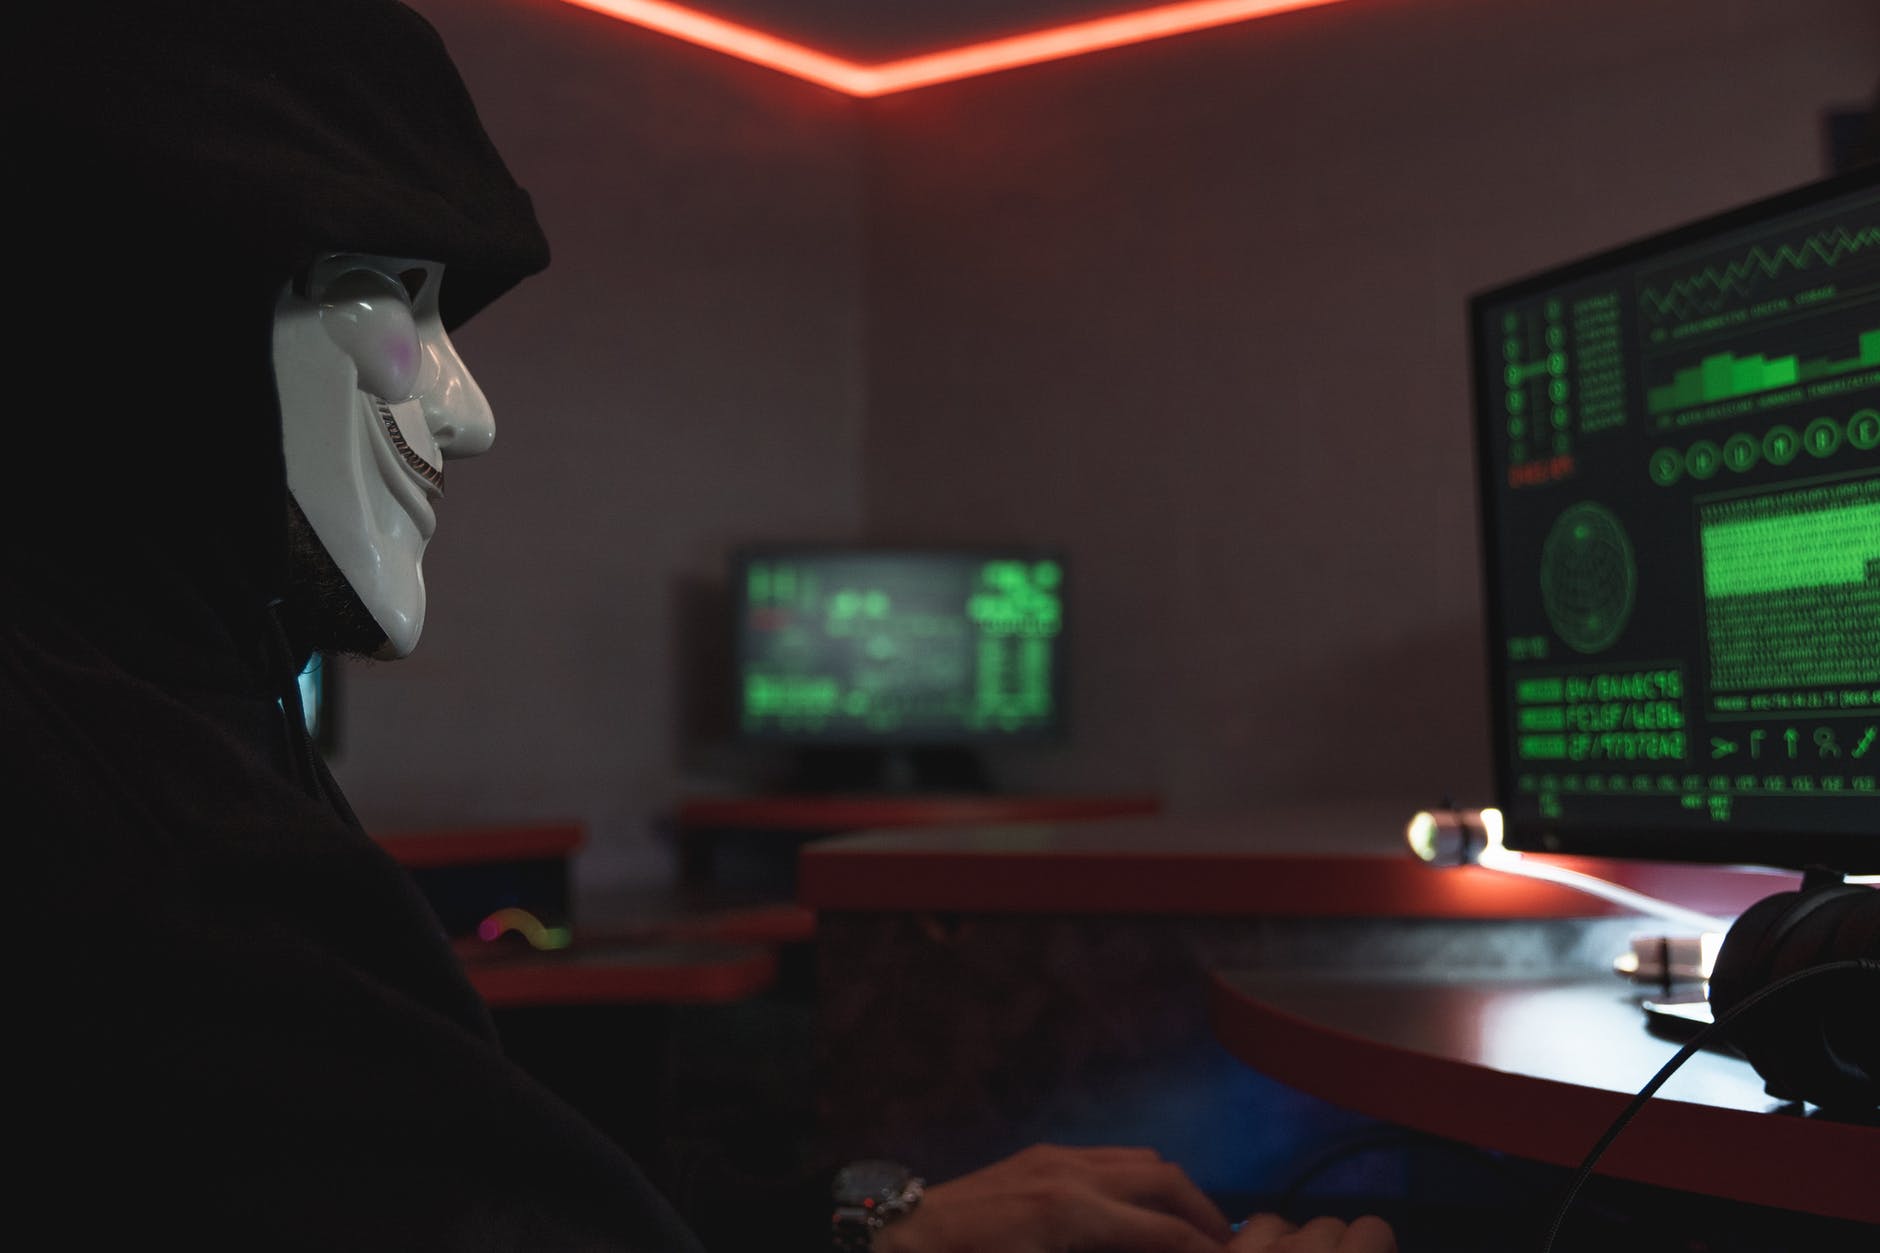 Hackers Target Gamers With Microsoft-Signed Rootkit